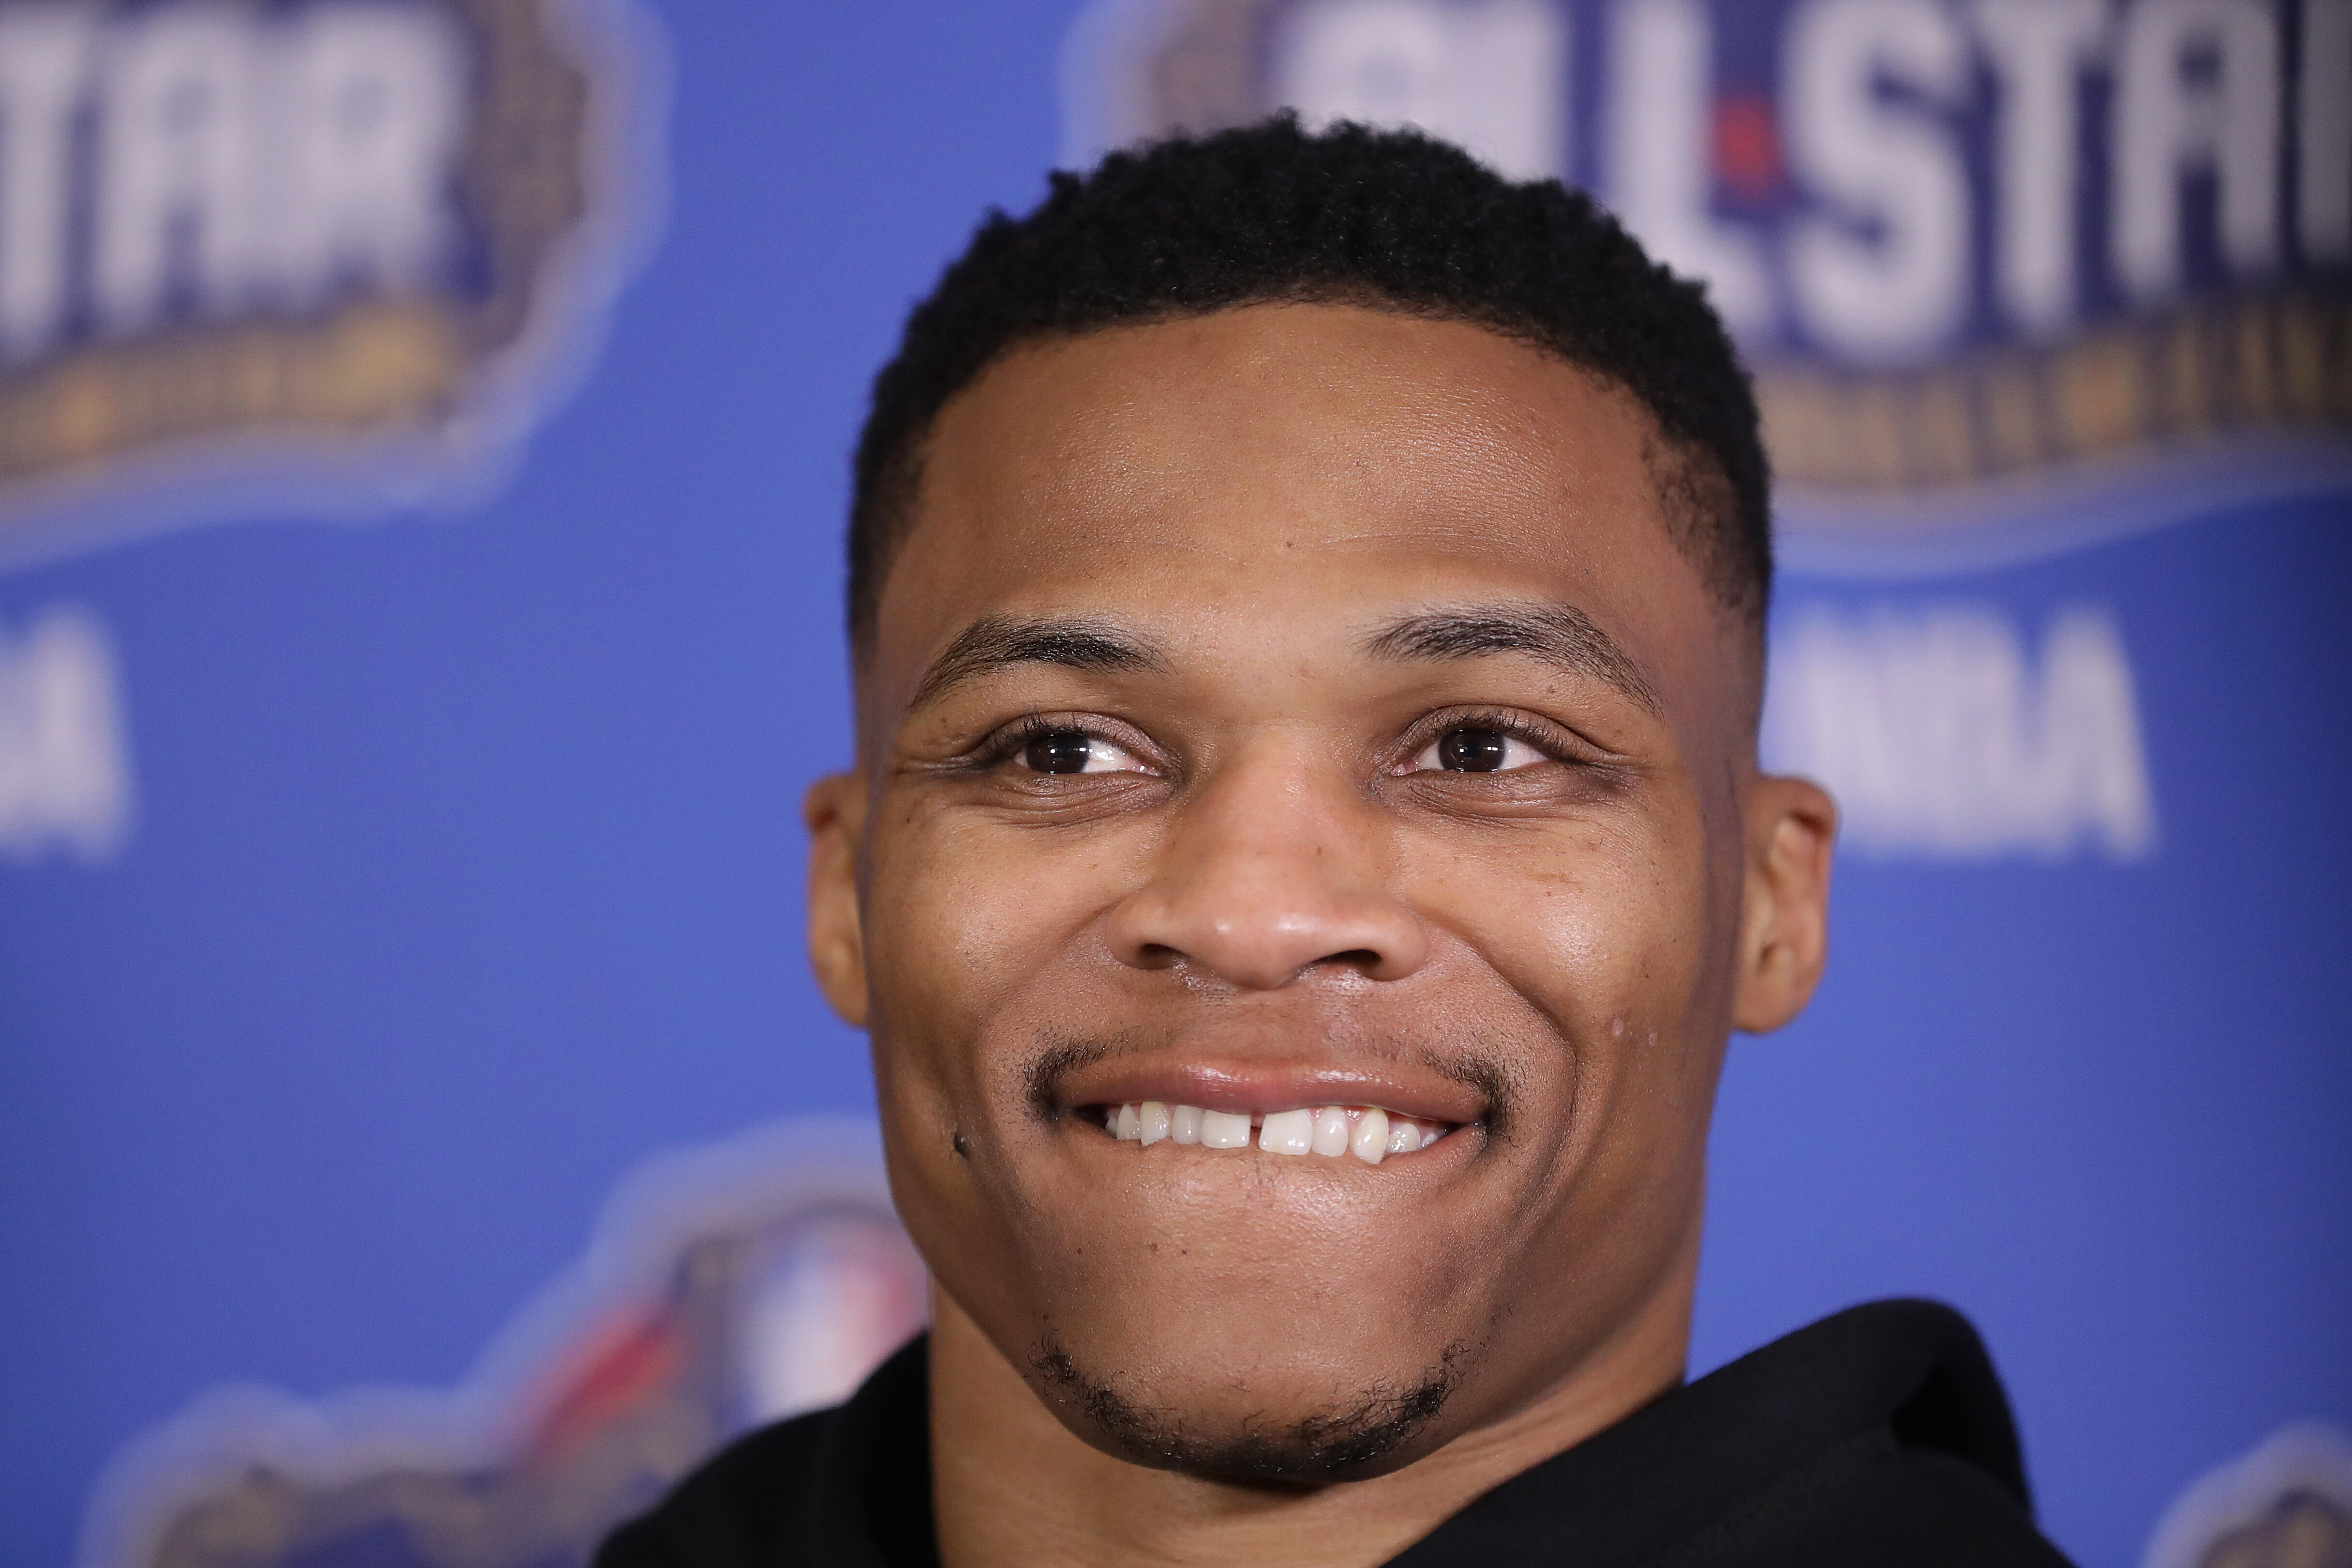 NEW ORLEANS, LA - FEBRUARY 17:  Russell Westbrook #0 of the Oklahoma City Thunder speaks with the media during media availability for the 2017 NBA All-Star Game at The Ritz-Carlton New Orleans on February 17, 2017 in New Orleans, Louisiana.  (Photo by Ron